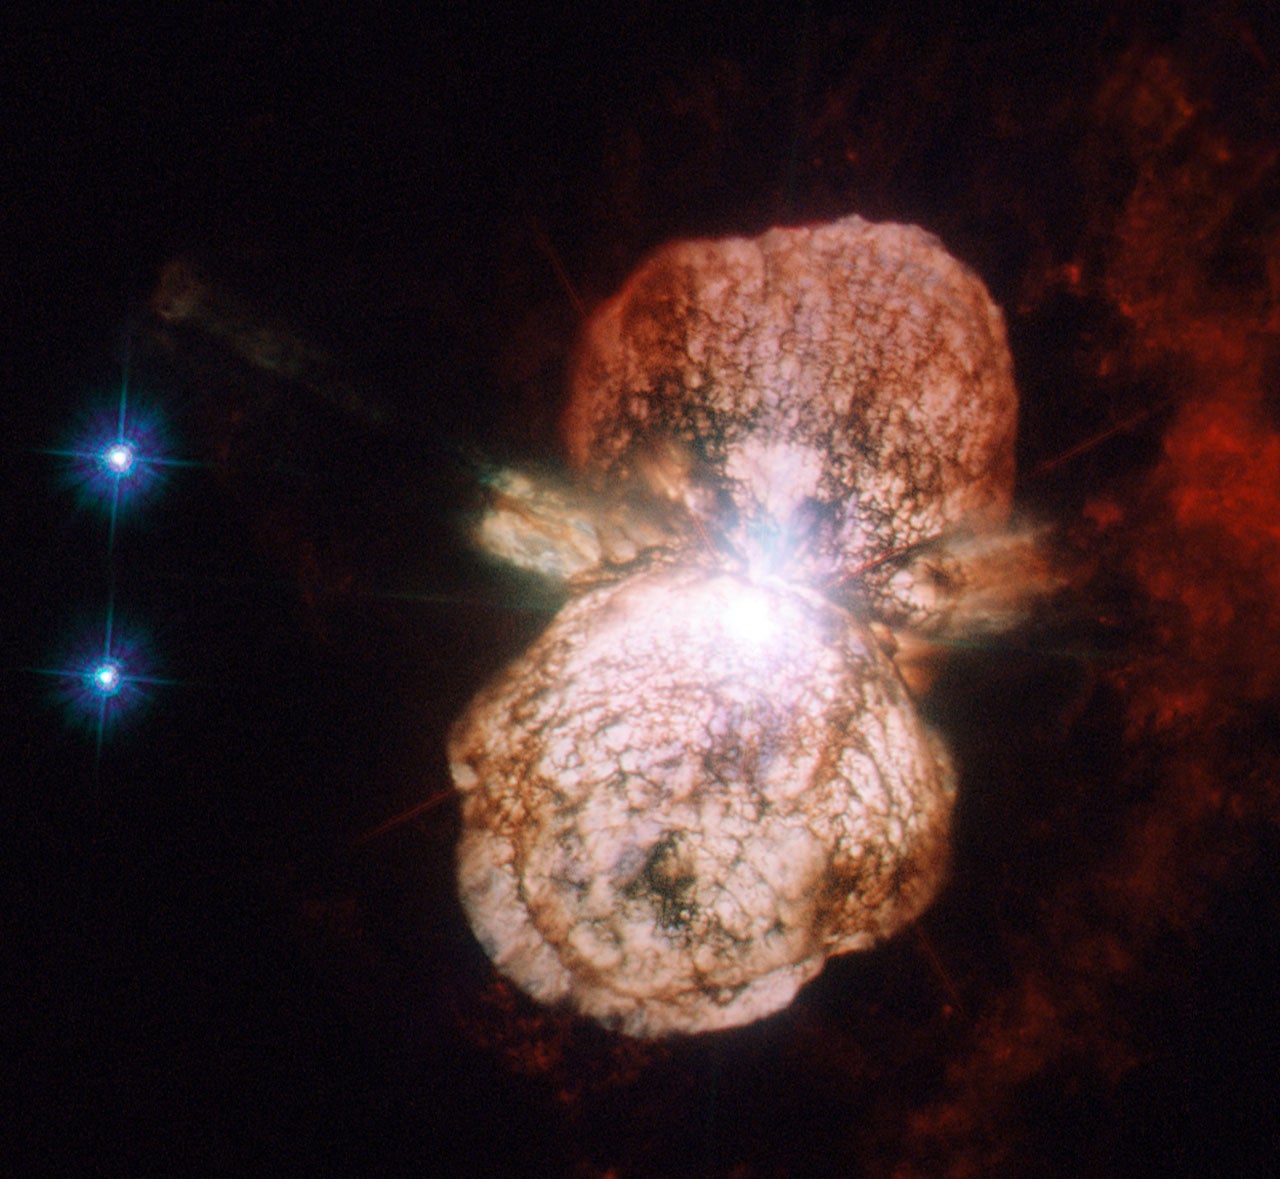 An artists conception of a supernova explosion, the death of a giant star